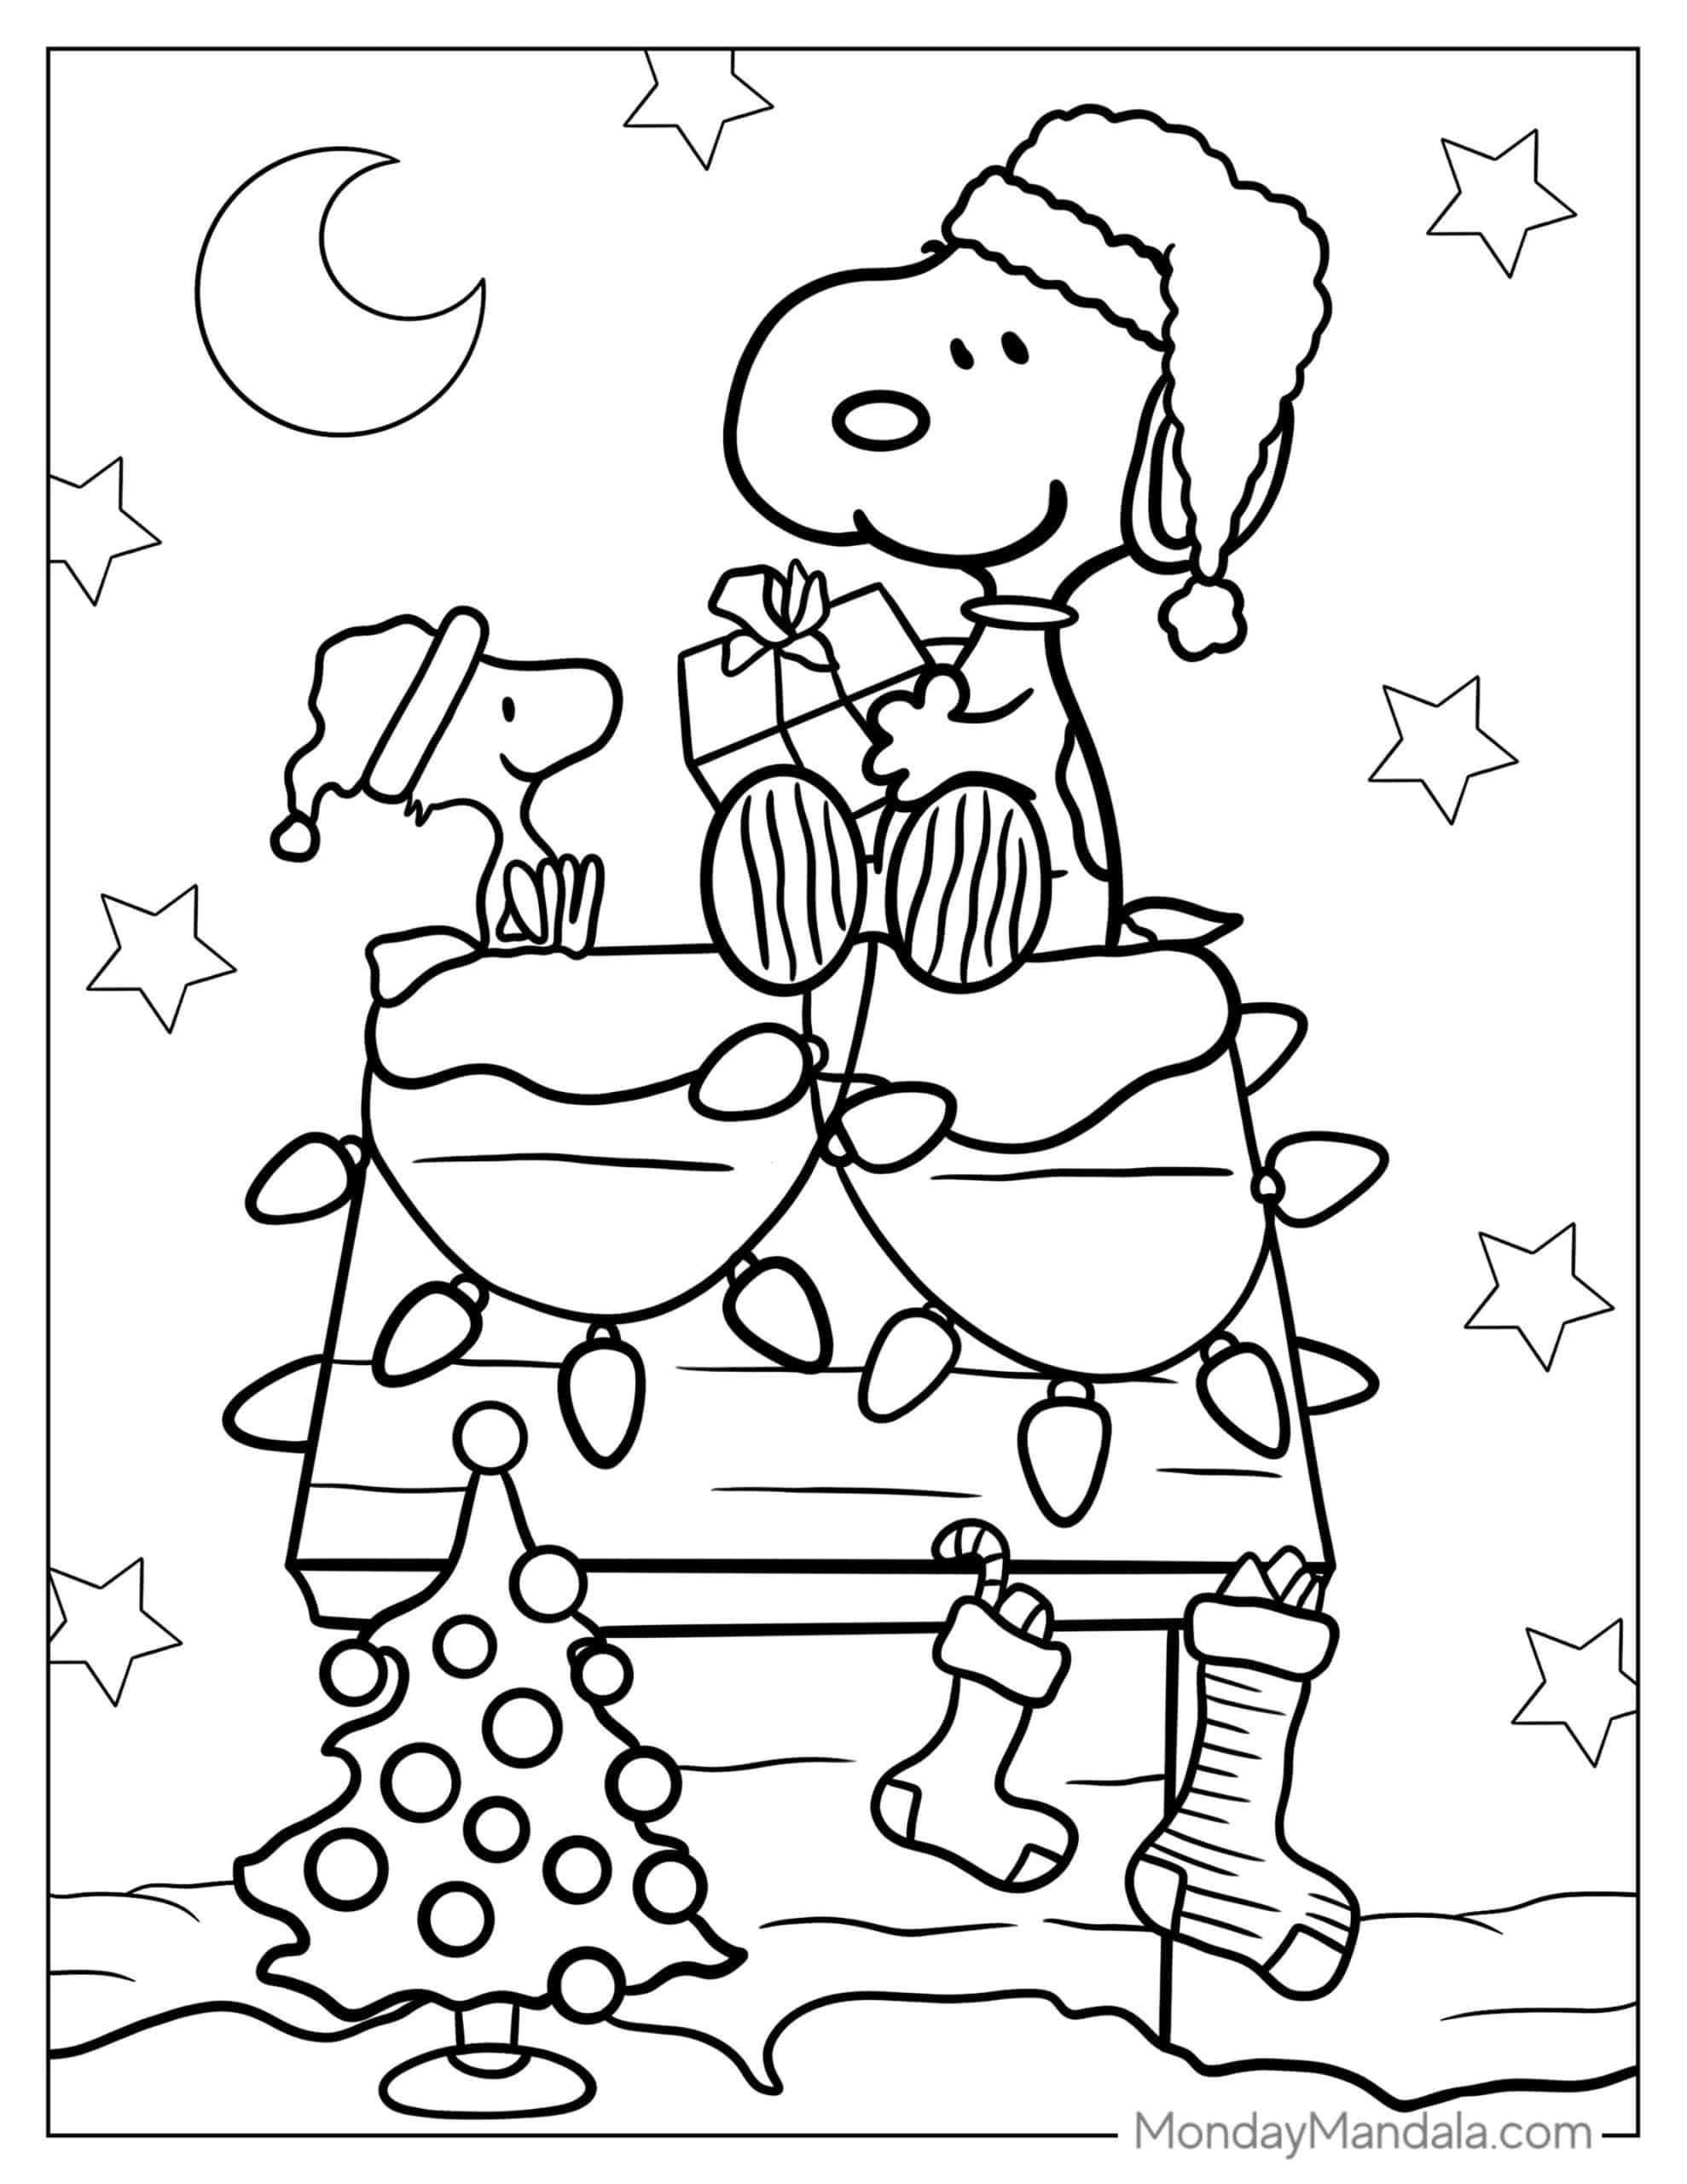 32 Peanuts & Snoopy Coloring Pages (Free PDF Printables)